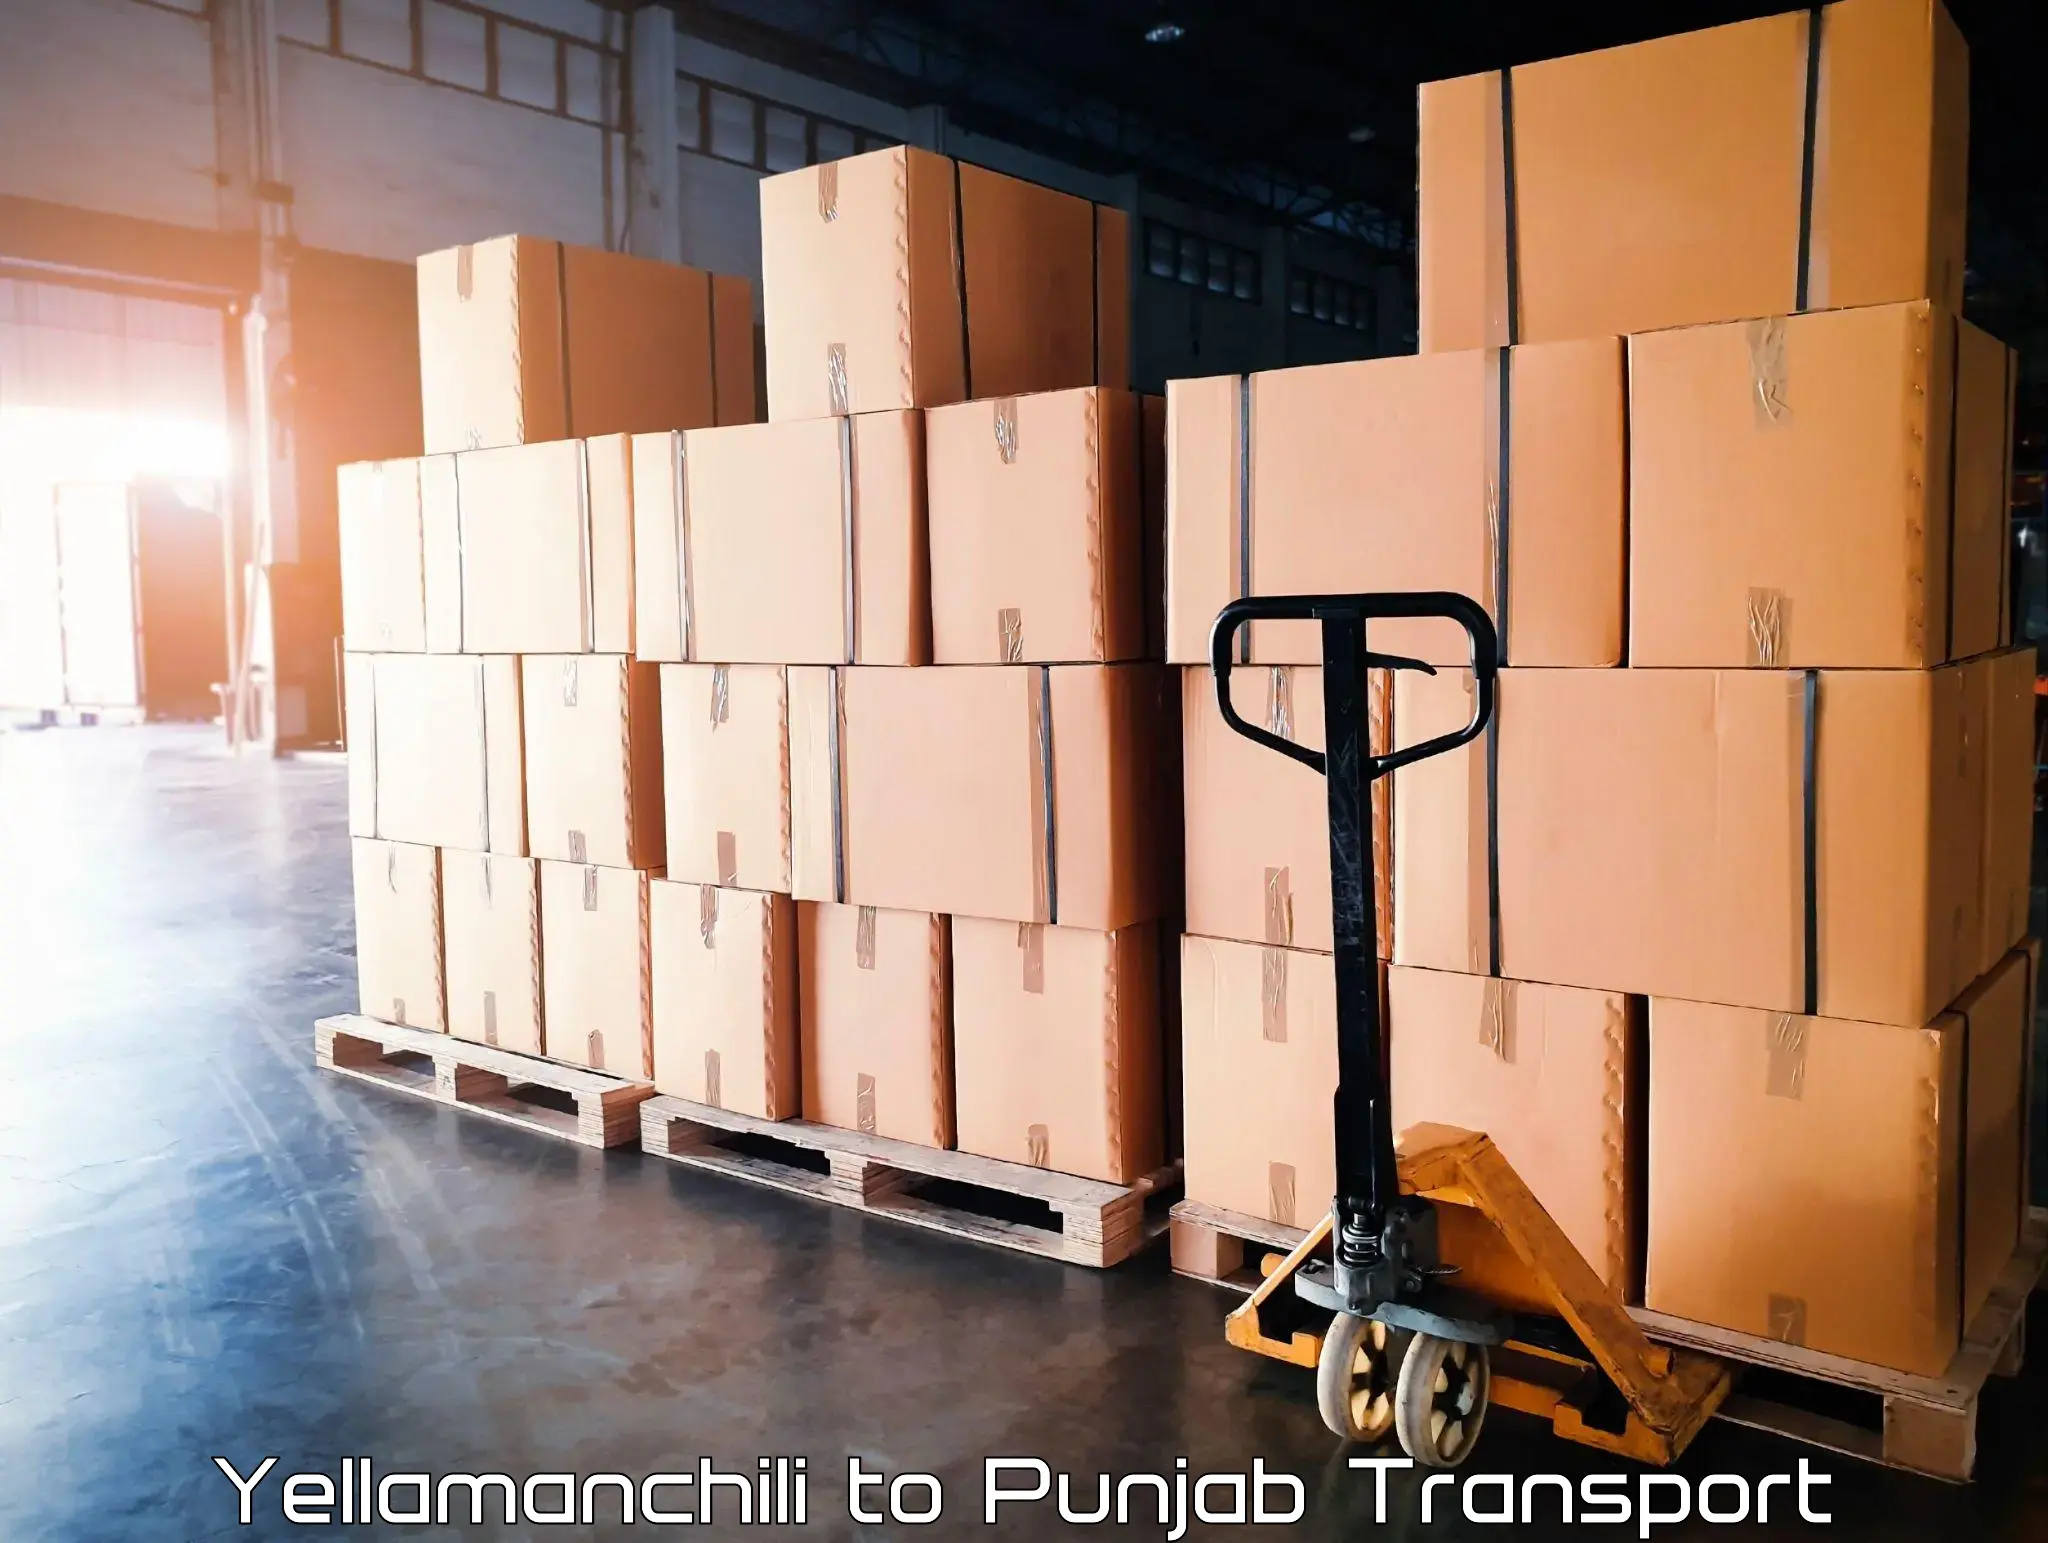 Commercial transport service Yellamanchili to IIT Ropar